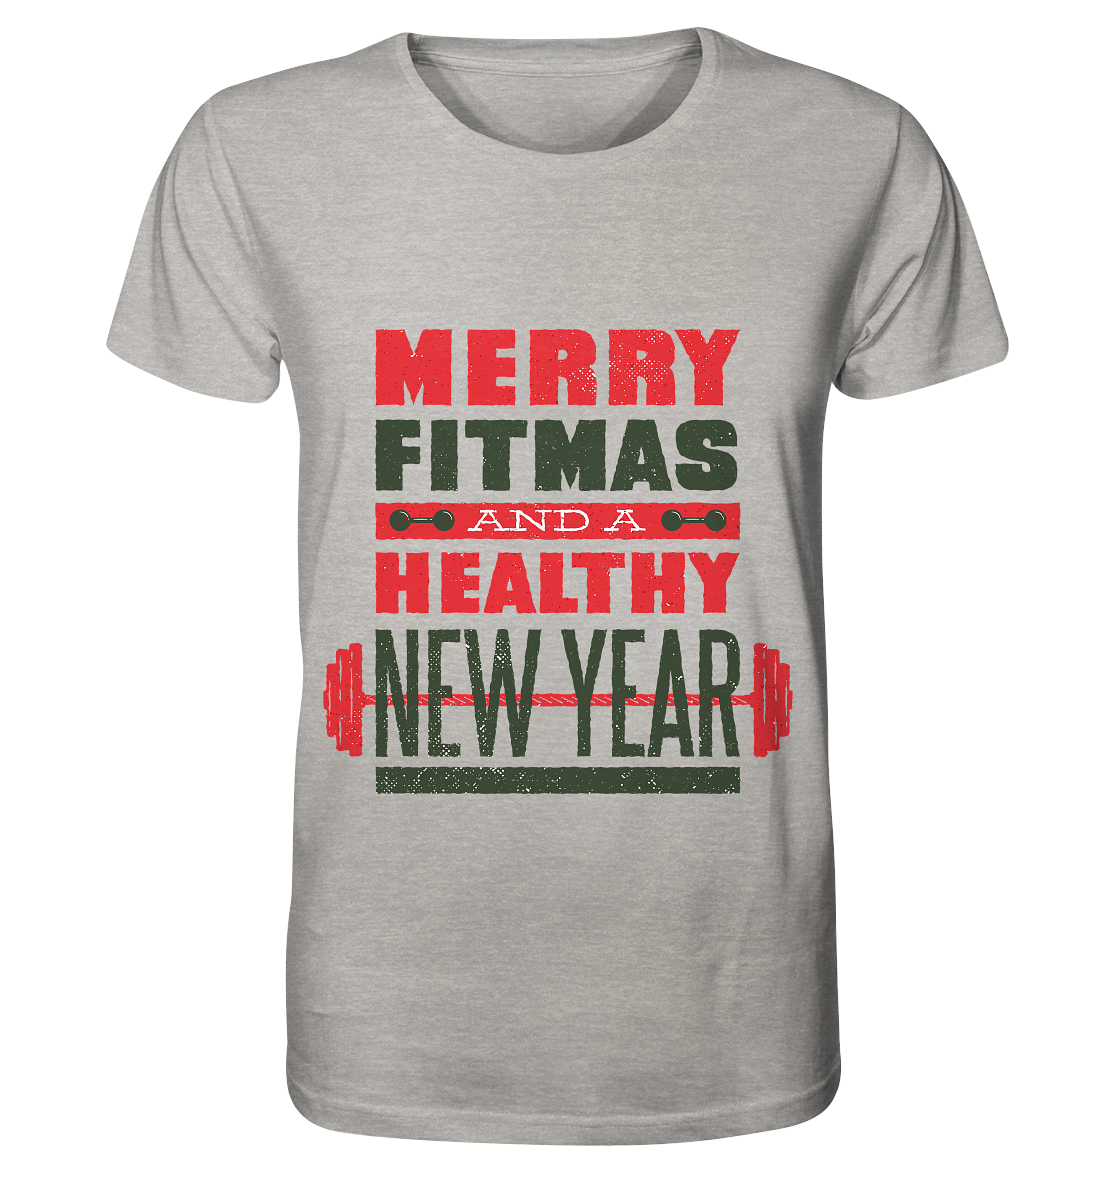 Weihnachtliches Design, Gym, Merry Fitmas and a Healthy New Year - Organic Shirt (meliert)